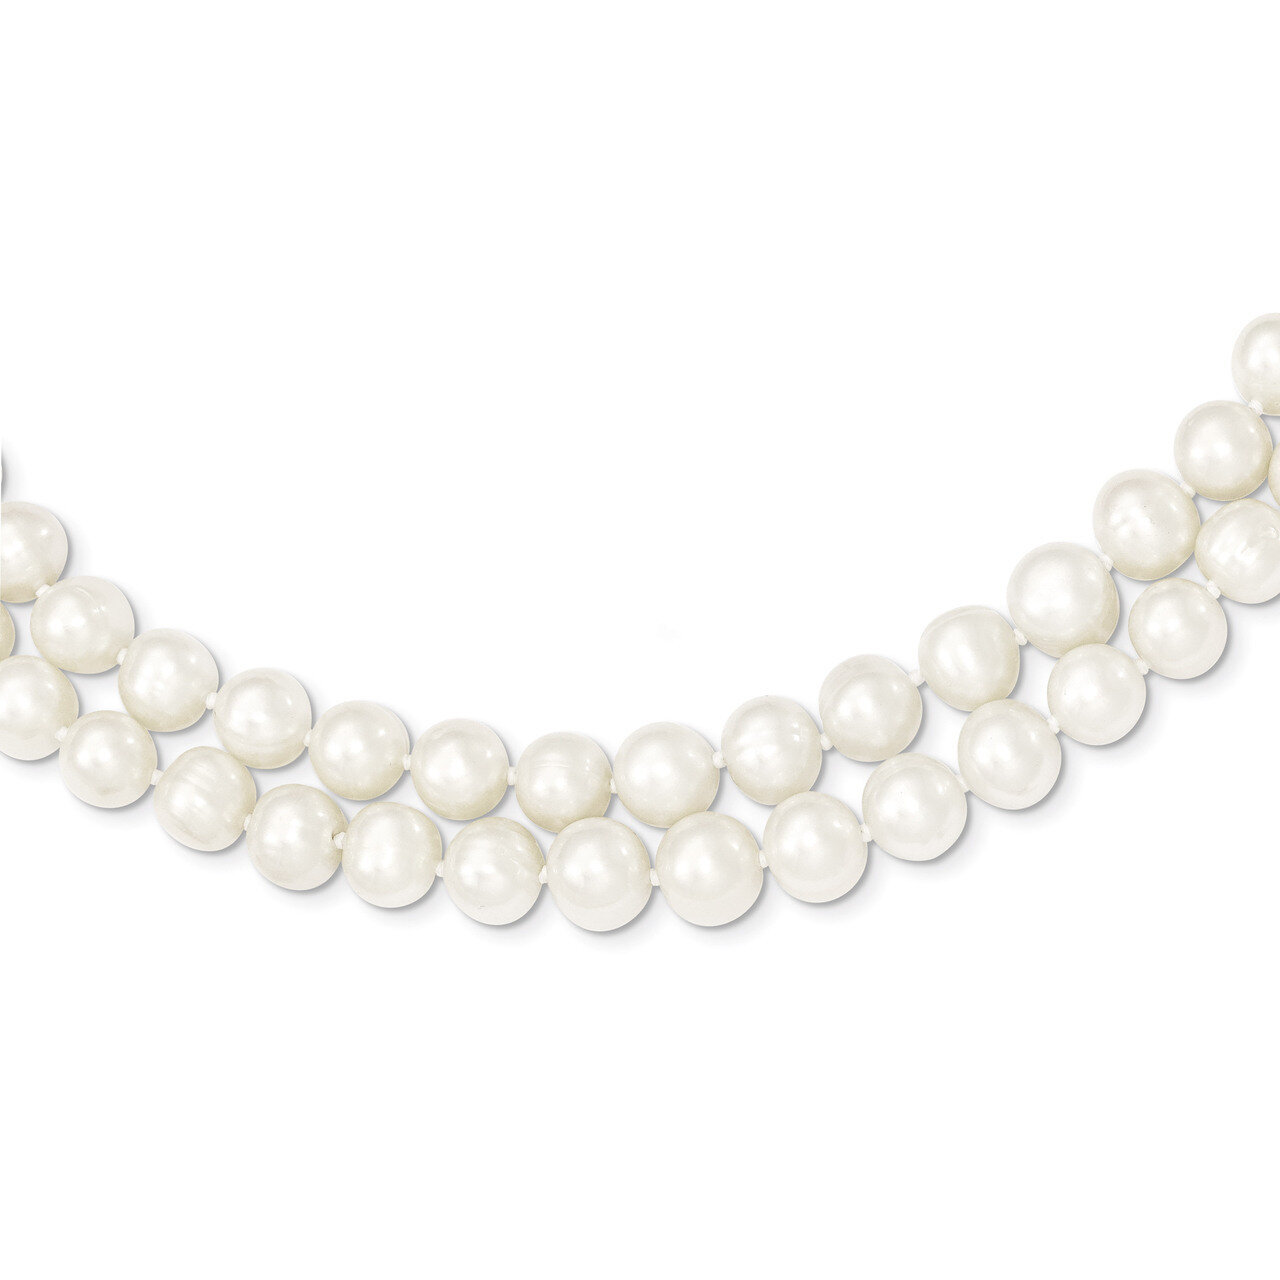 7.5-9mm 2 Strand Cultured Pearl Necklace 18 Inch 14k Gold PR18-18